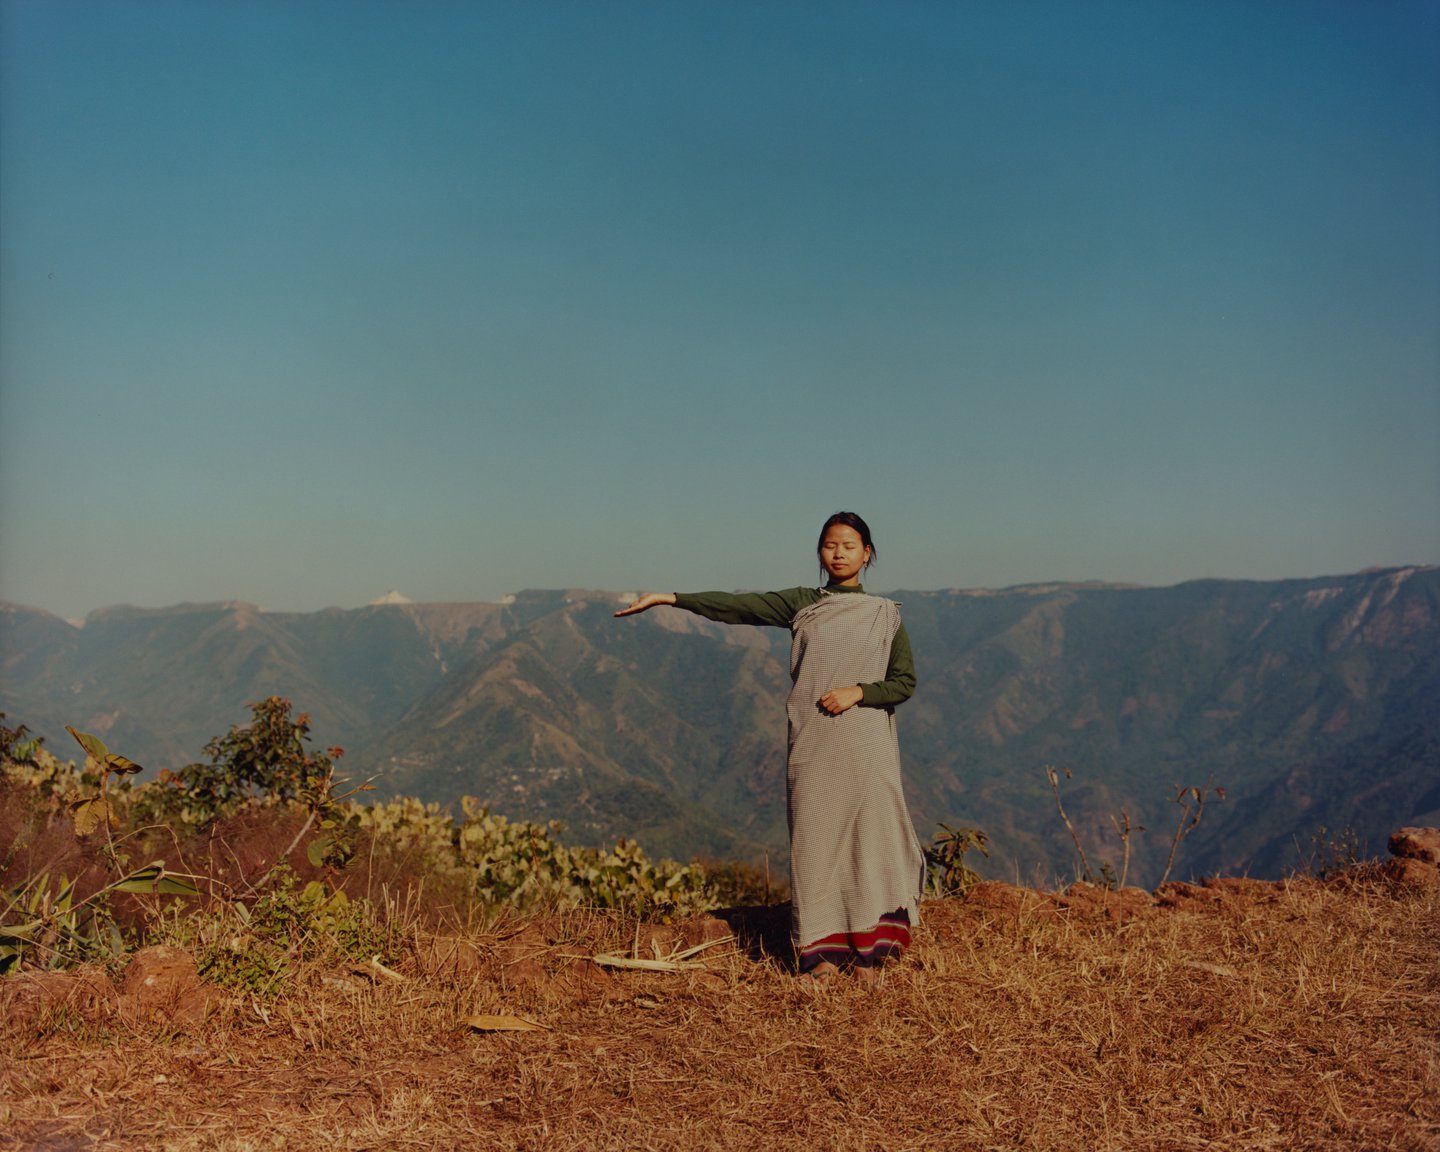 In northern India, Bharat Sikka photographs the Khasi people’s deep understanding of nature